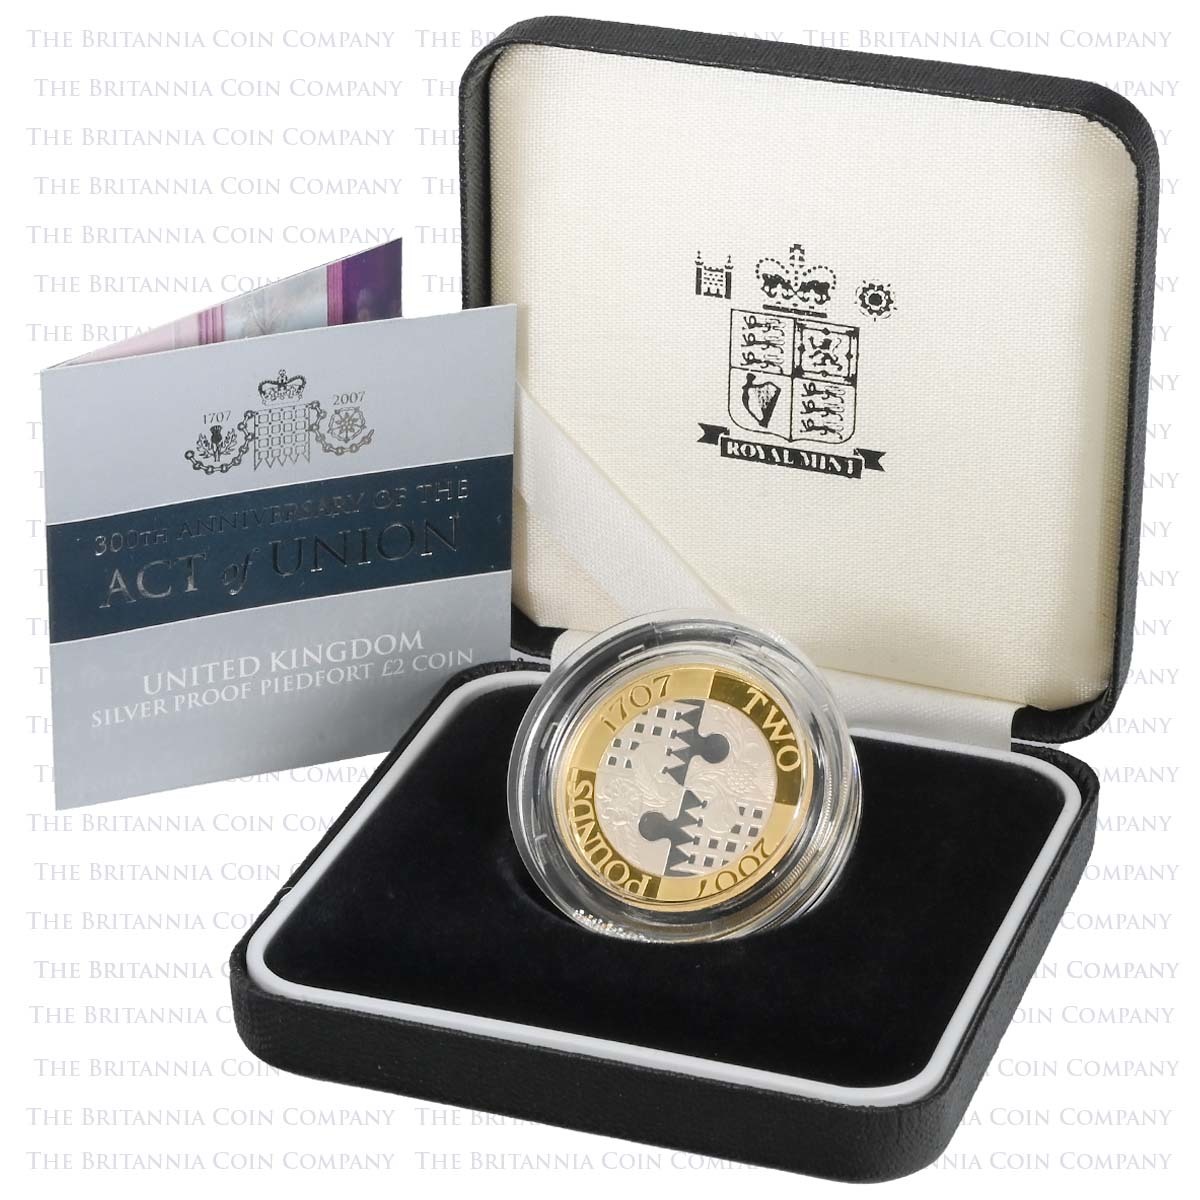 UKAOUPF 2007 Act of Union £2 Piedfort Silver Proof Boxed